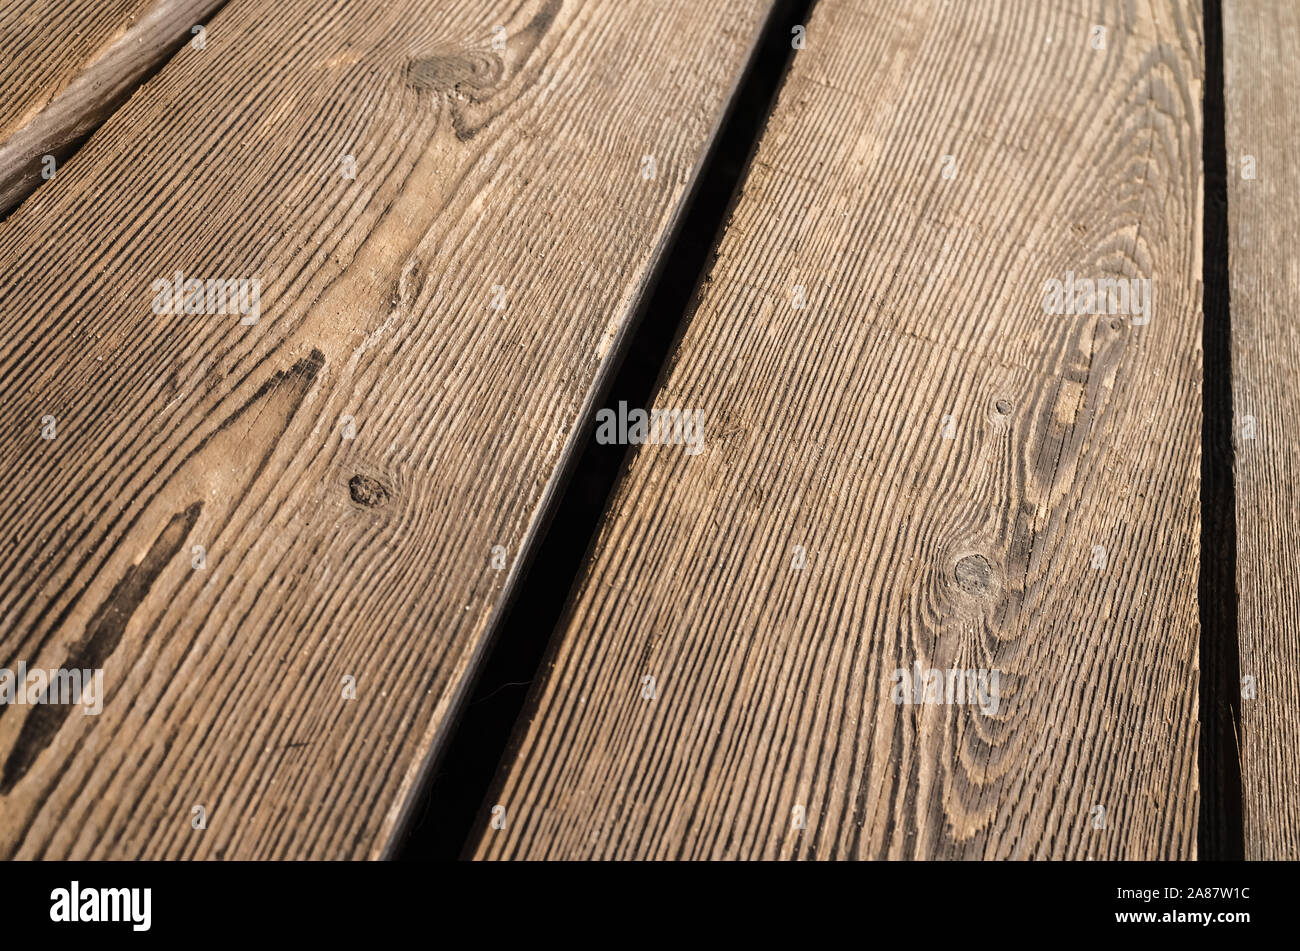 Old wooden floor made of rough oak boards, background photo with selective focus Stock Photo